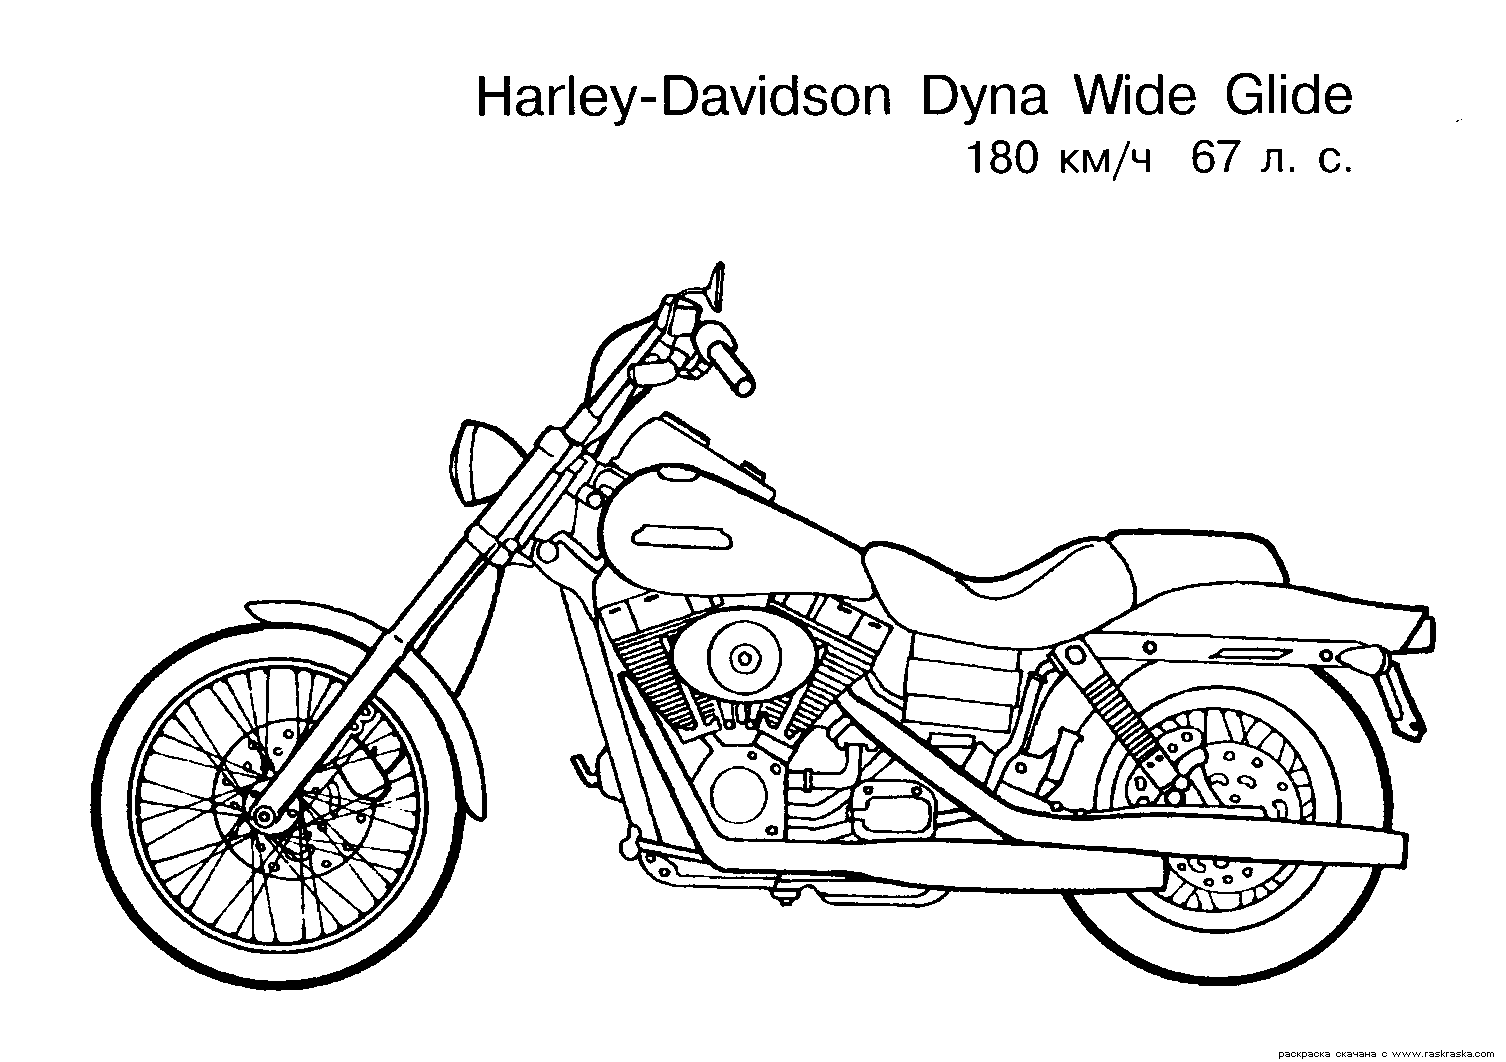 Free Motorcycle coloring page, letscoloringpages.com, Harley-Davidson Dina Glide